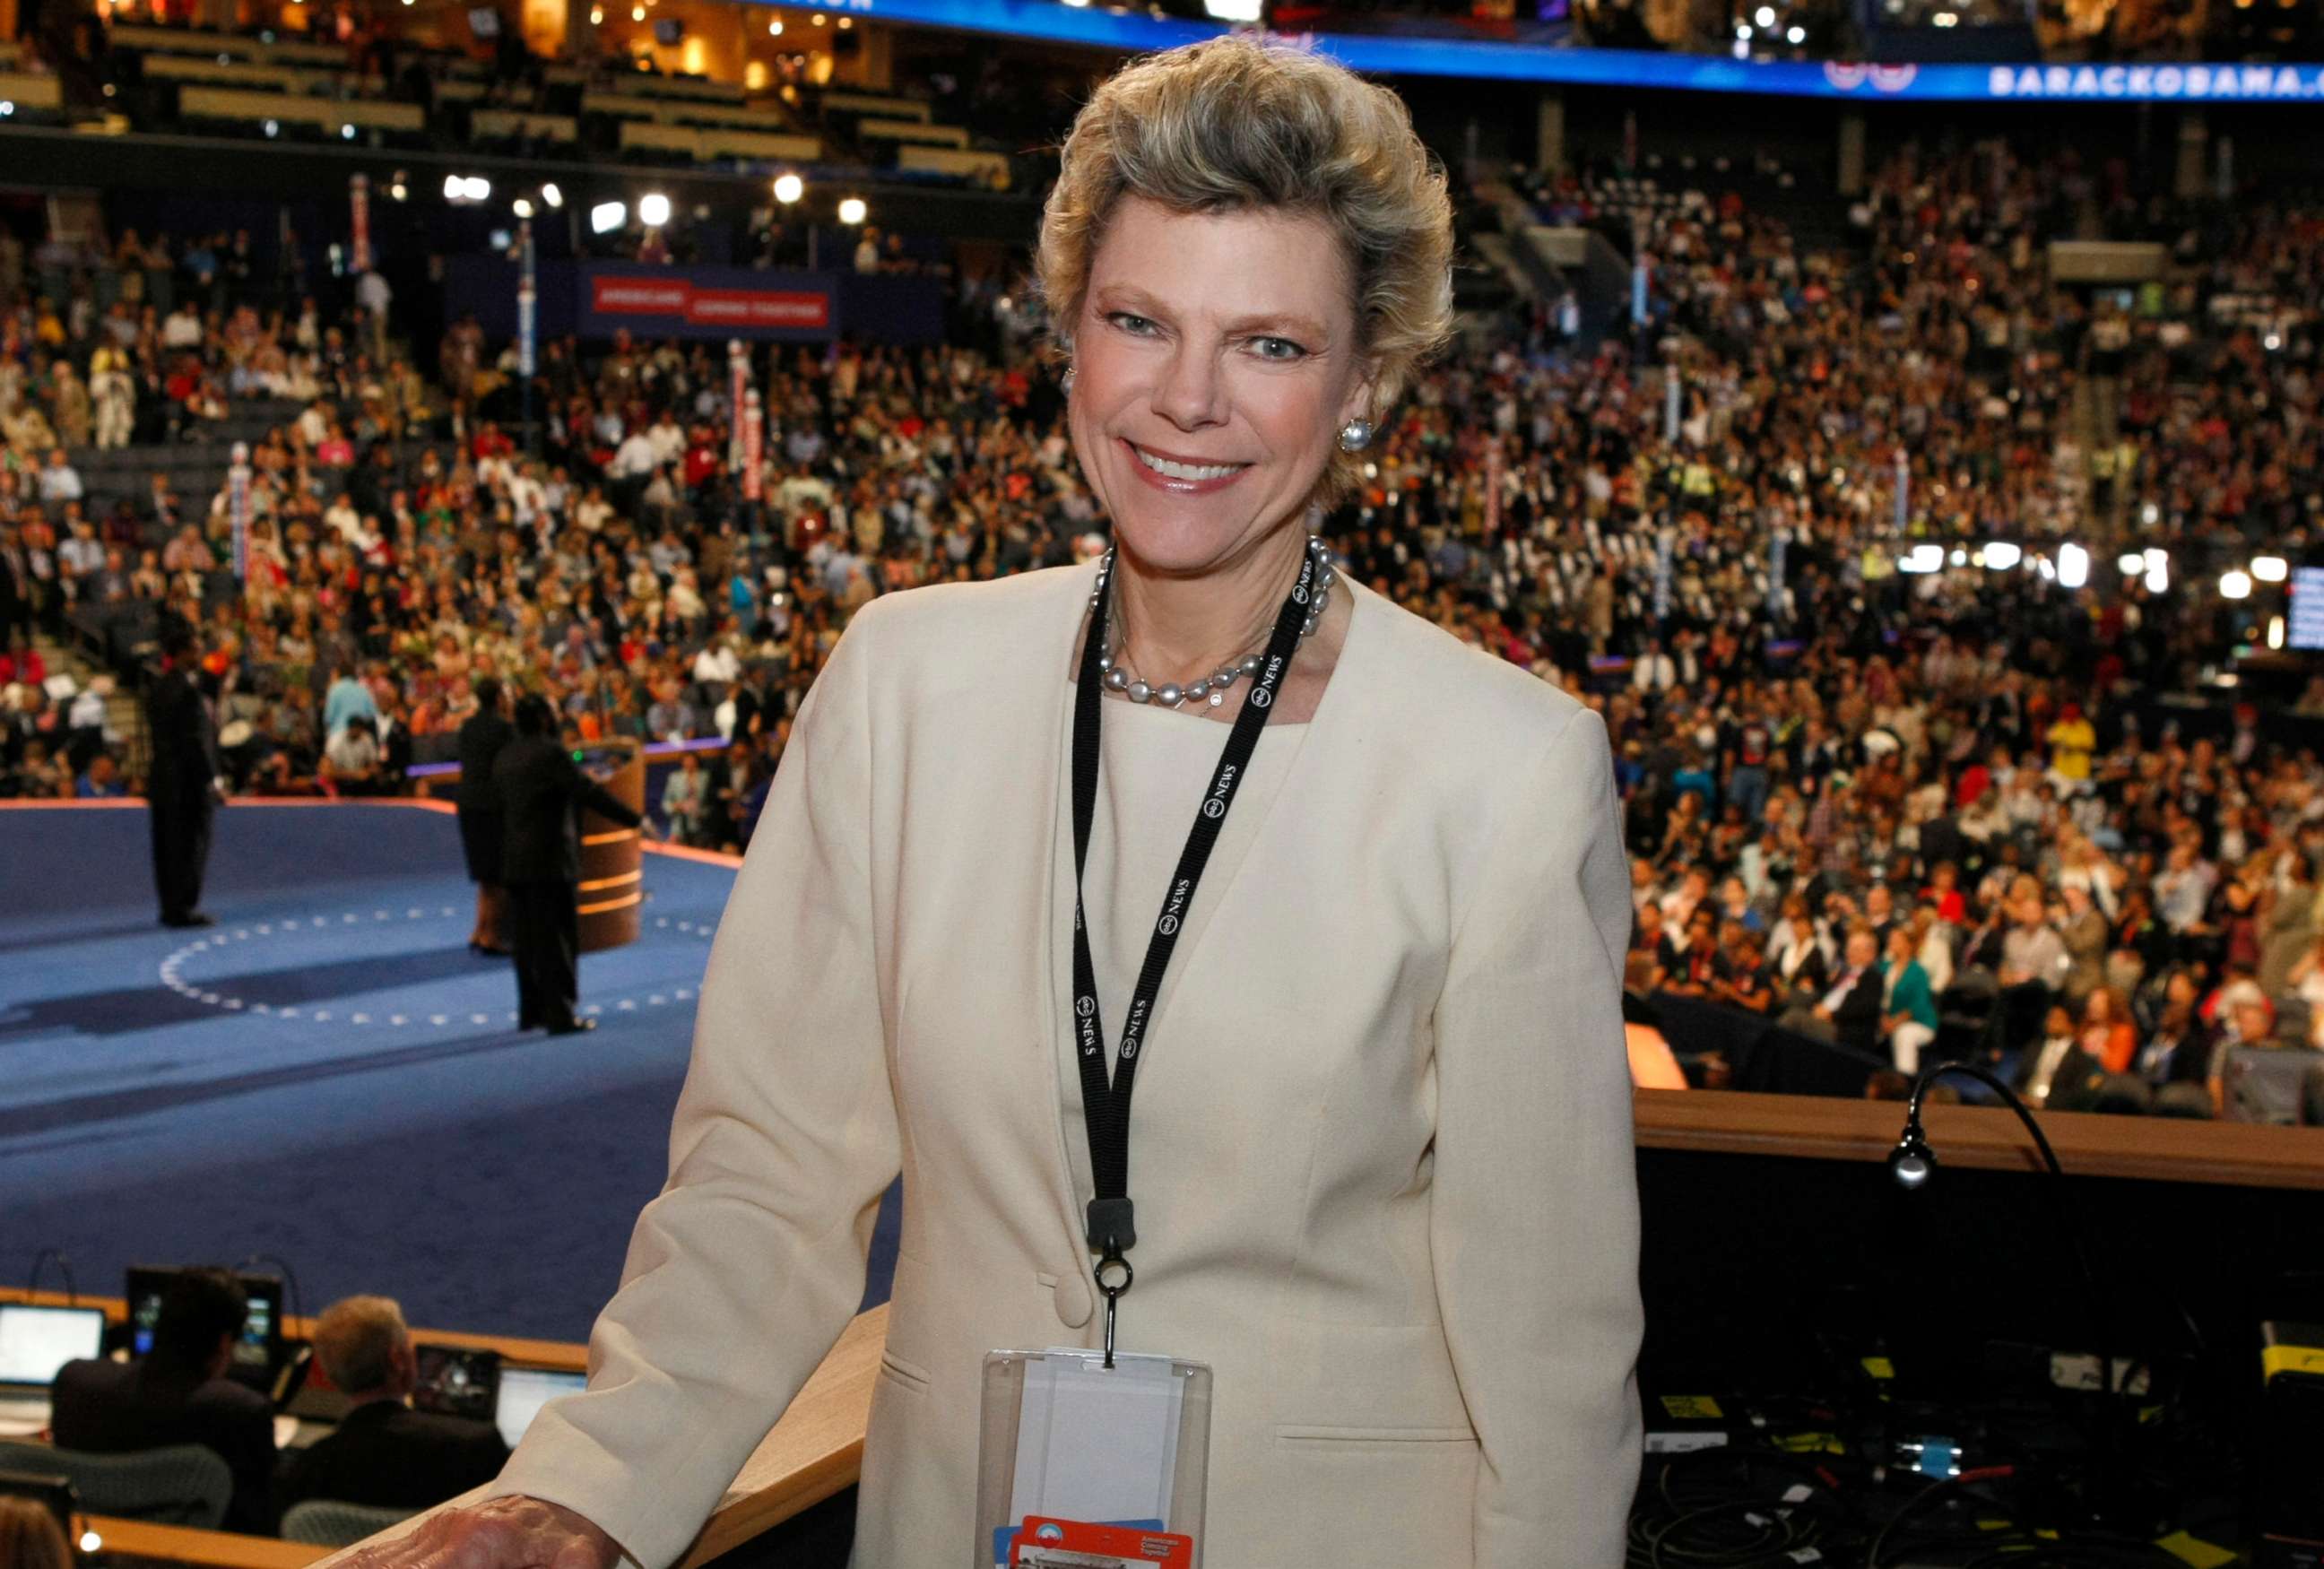 PHOTO: Cokie Roberts covering the 2012 Democratic National Convention in Charlotte, N.C.